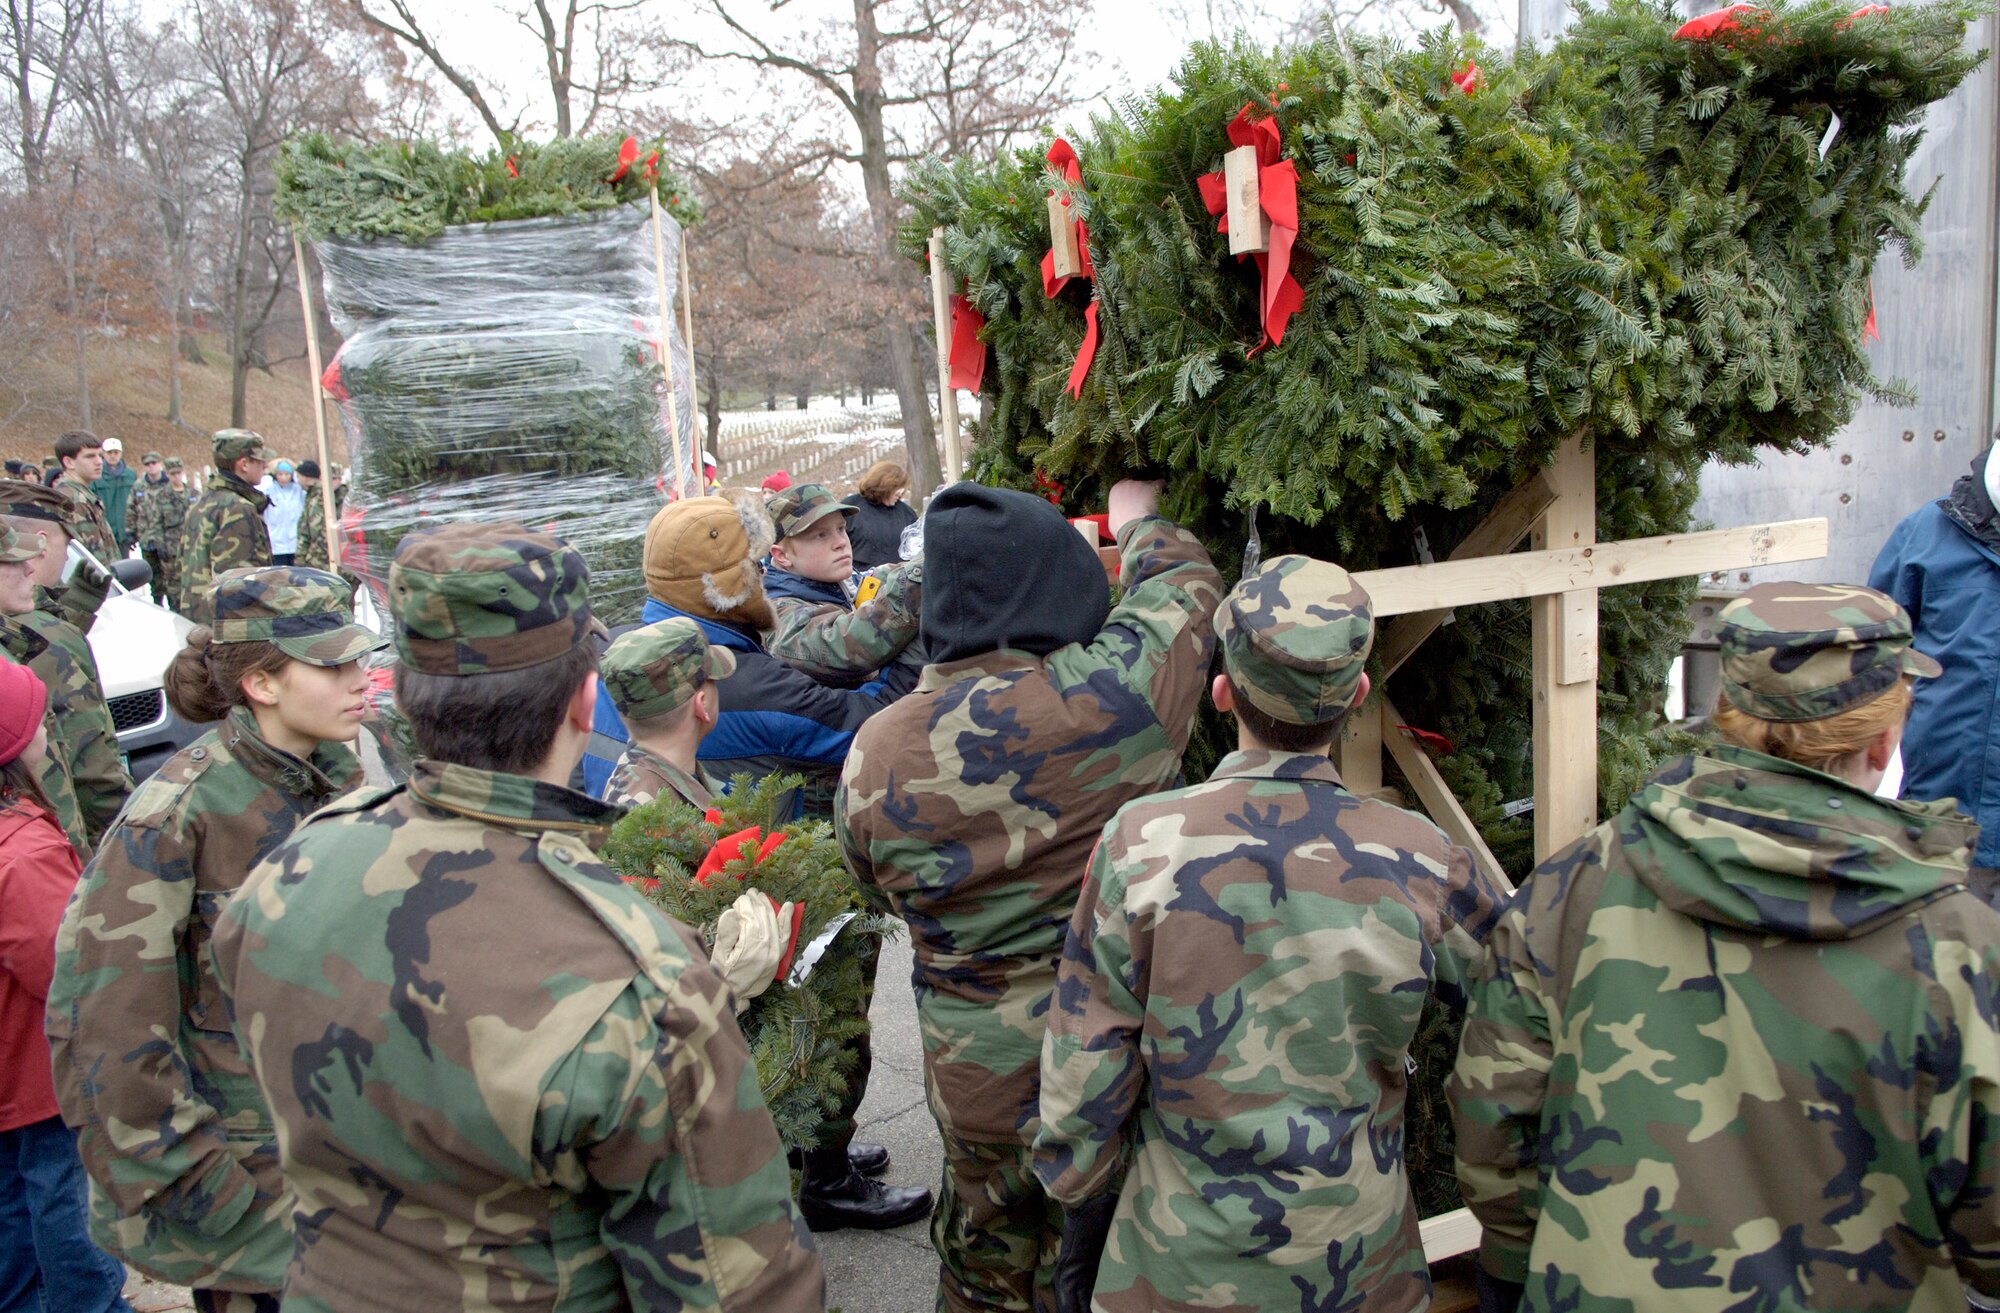 ARLINGTON, Va. (AFPN) -- Hundreds of volunteers gathered at Arlington National Cemetery to place more than 5,000 donated Christmas wreaths on head stones. The 14th annual wreath laying event is the result of Worcester Wreath Company's owner Morrill Worcester's, childhood dream of doing something to honor those laid to rest in the national cemetery.. (U.S. Air Force photo by Master Sgt. Jim Varhegyi)